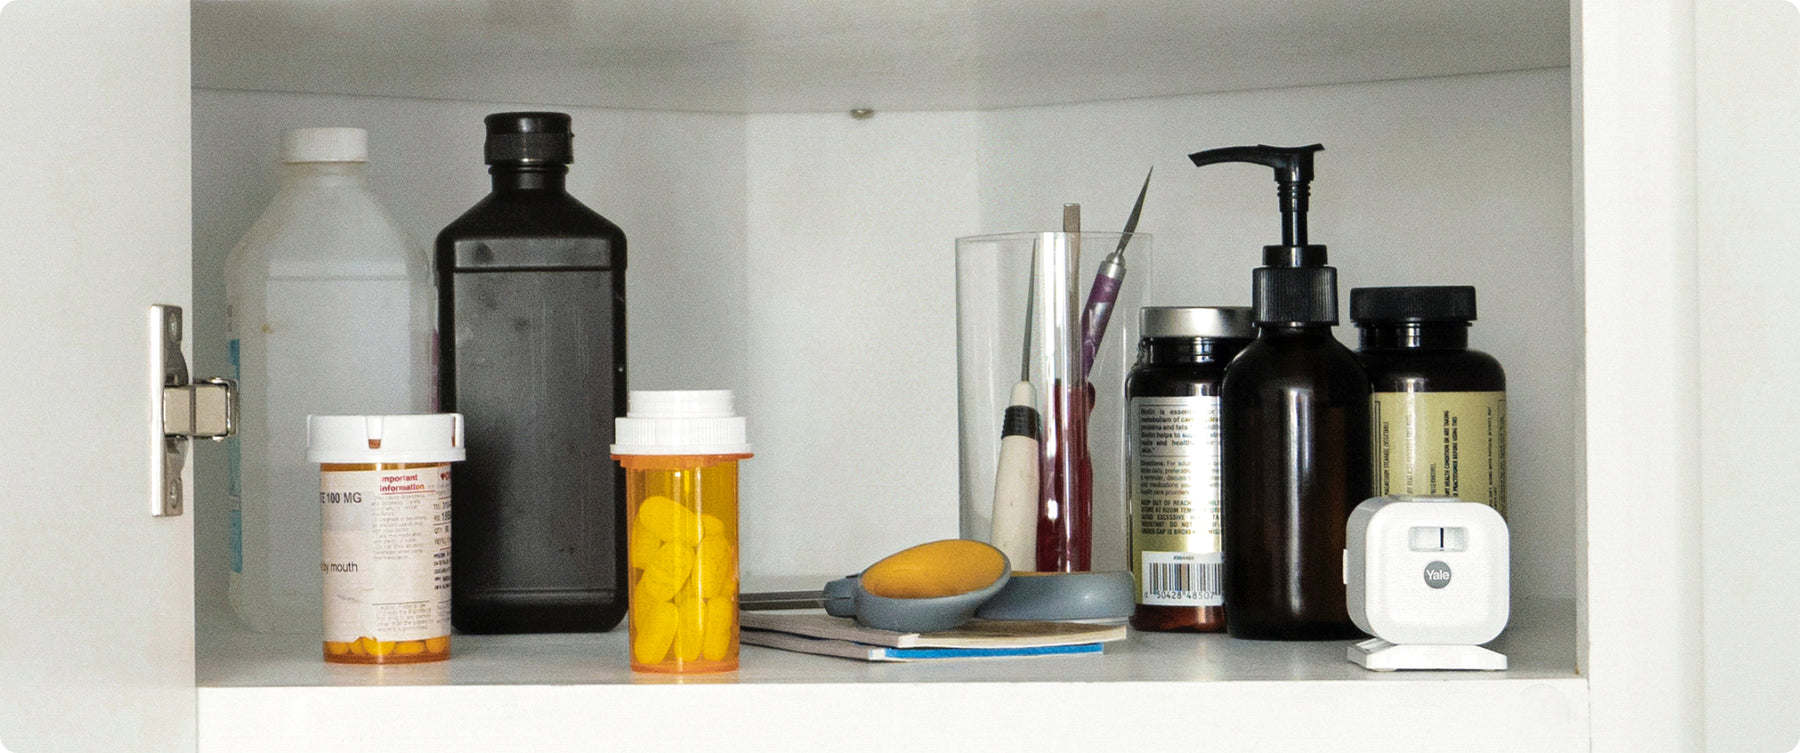 A medicine cabinet with a Yale camera in it